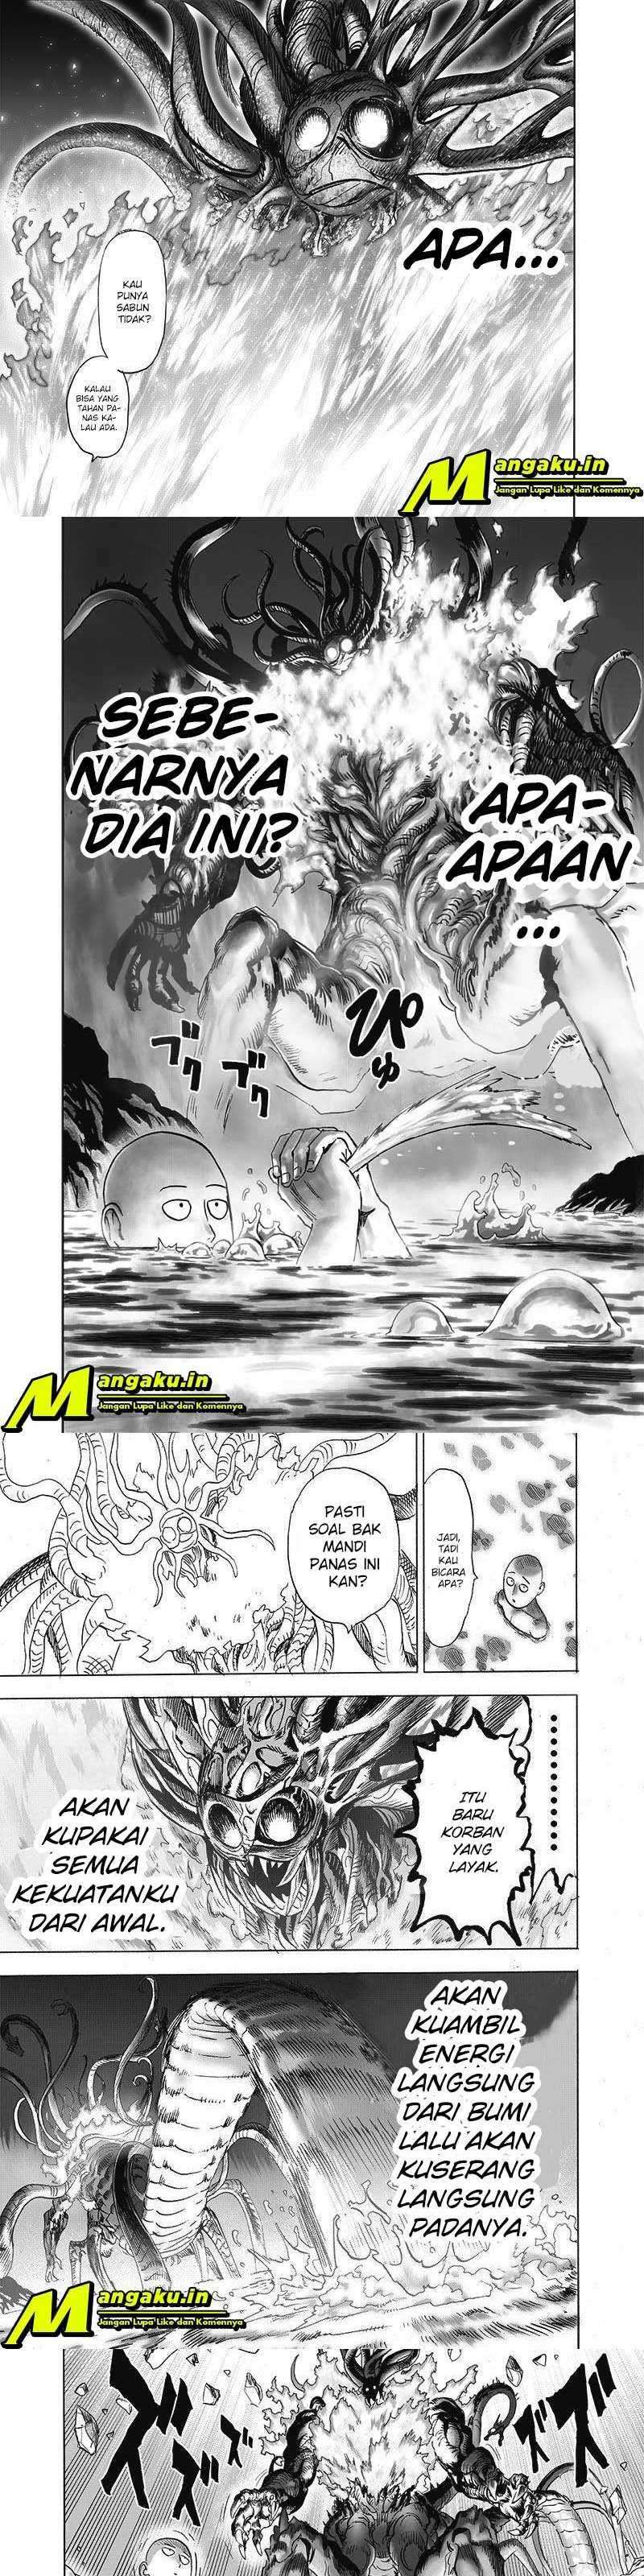 One Punch Man Chapter 199.1